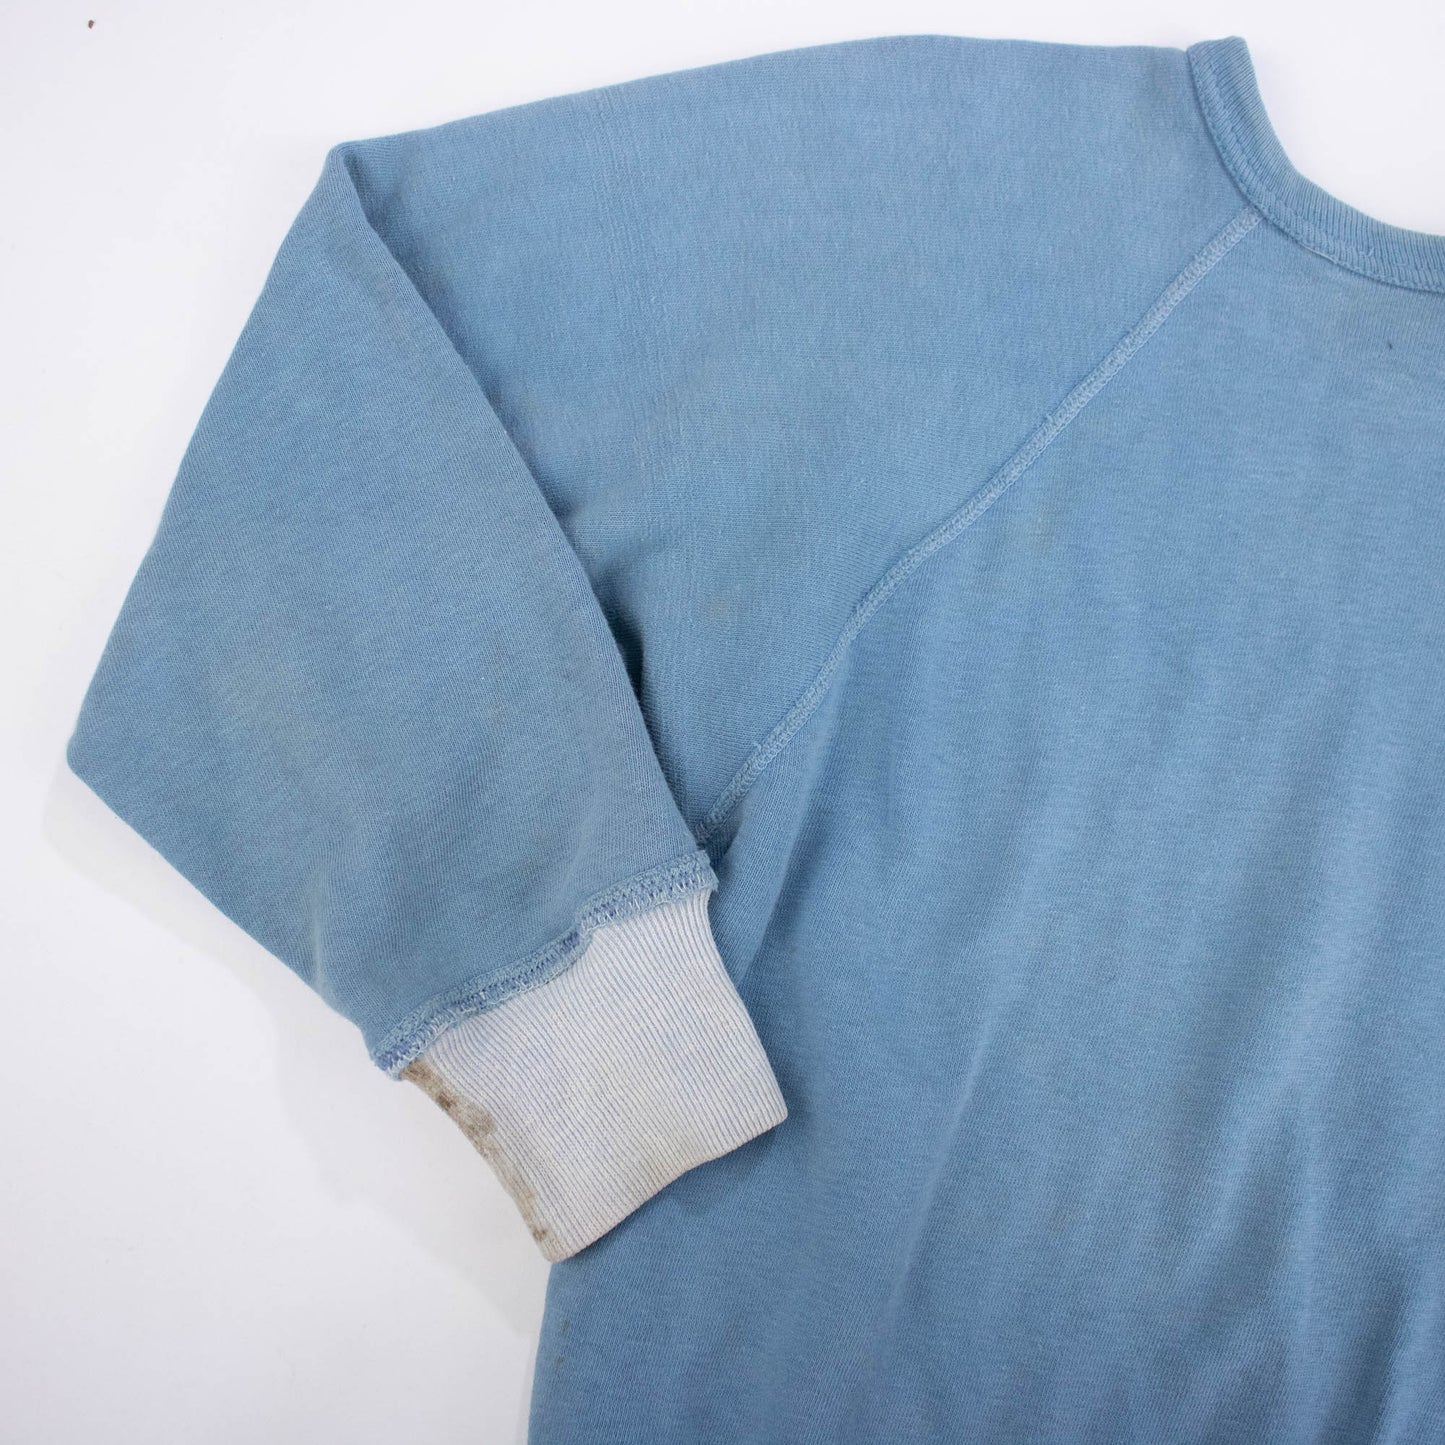 RESERVED FOR ALEX 50's Blue Cotton Remade Sweatshirt with Light Blue Cuffs